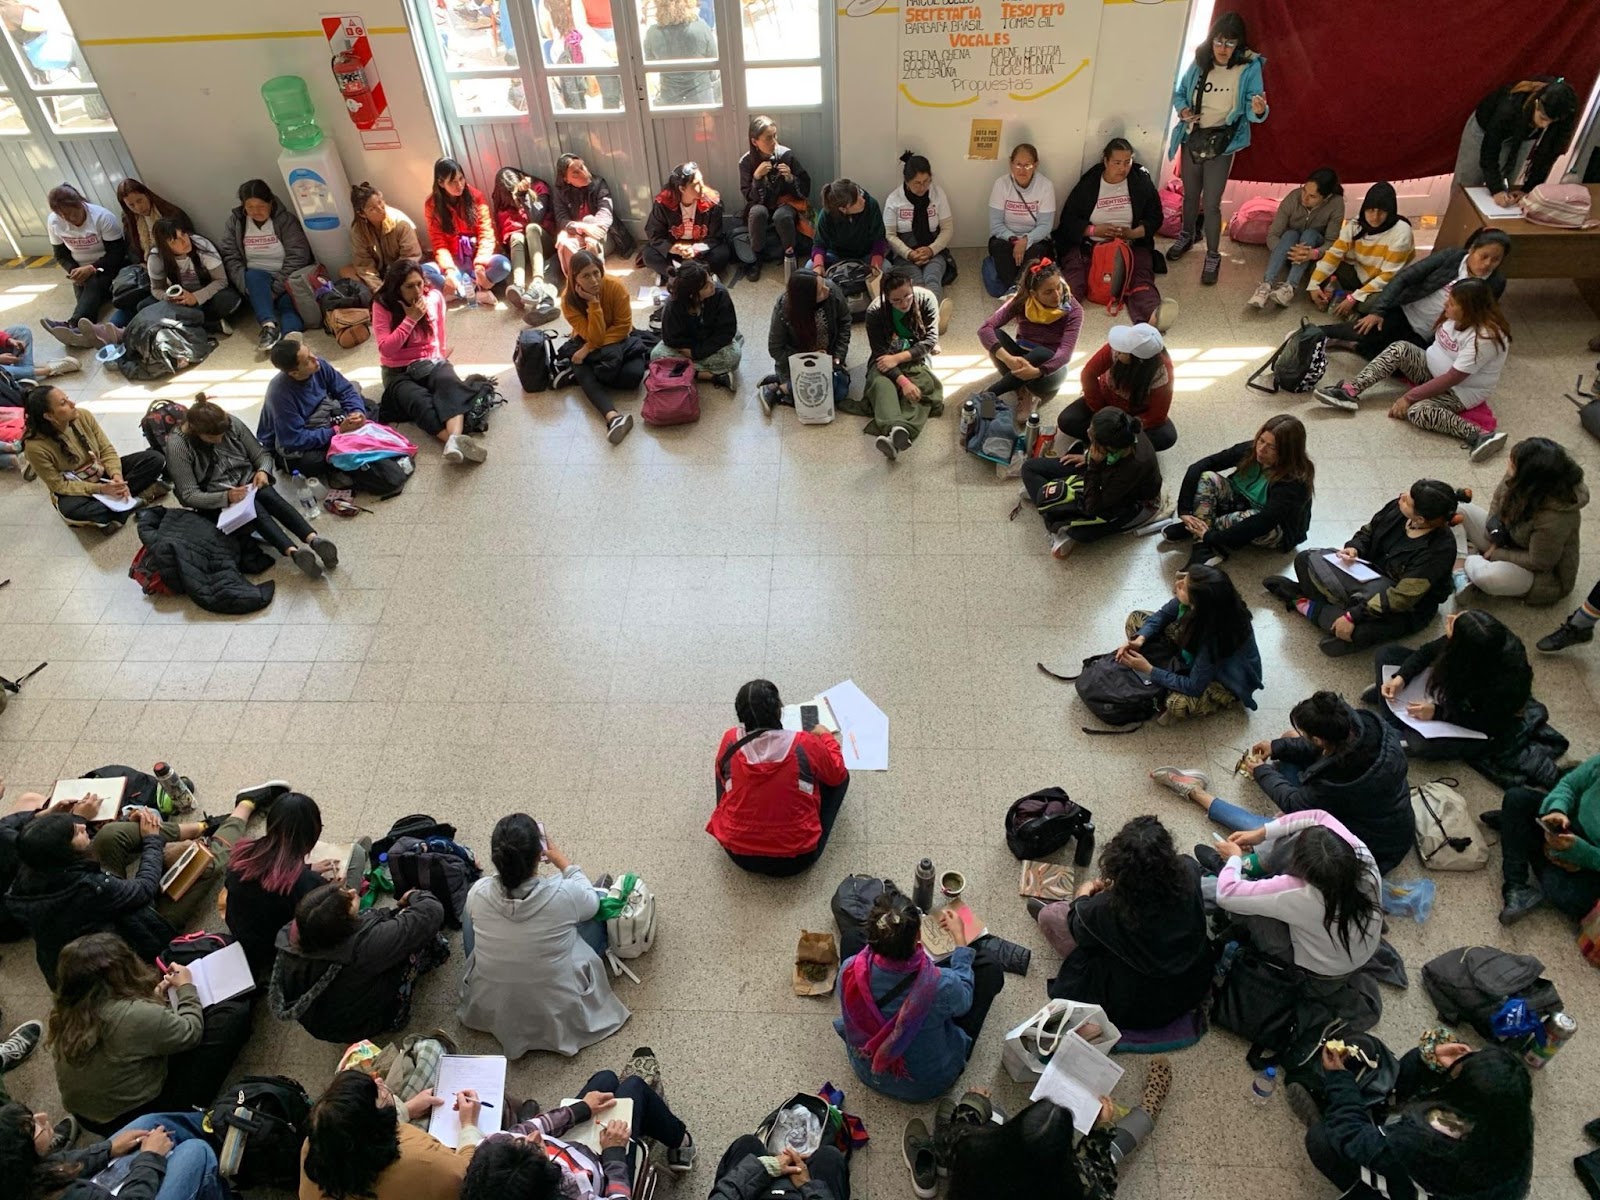 Bird’s eye view of a large group of people sitting in a circle on a warm gray ceramic tiled floor.